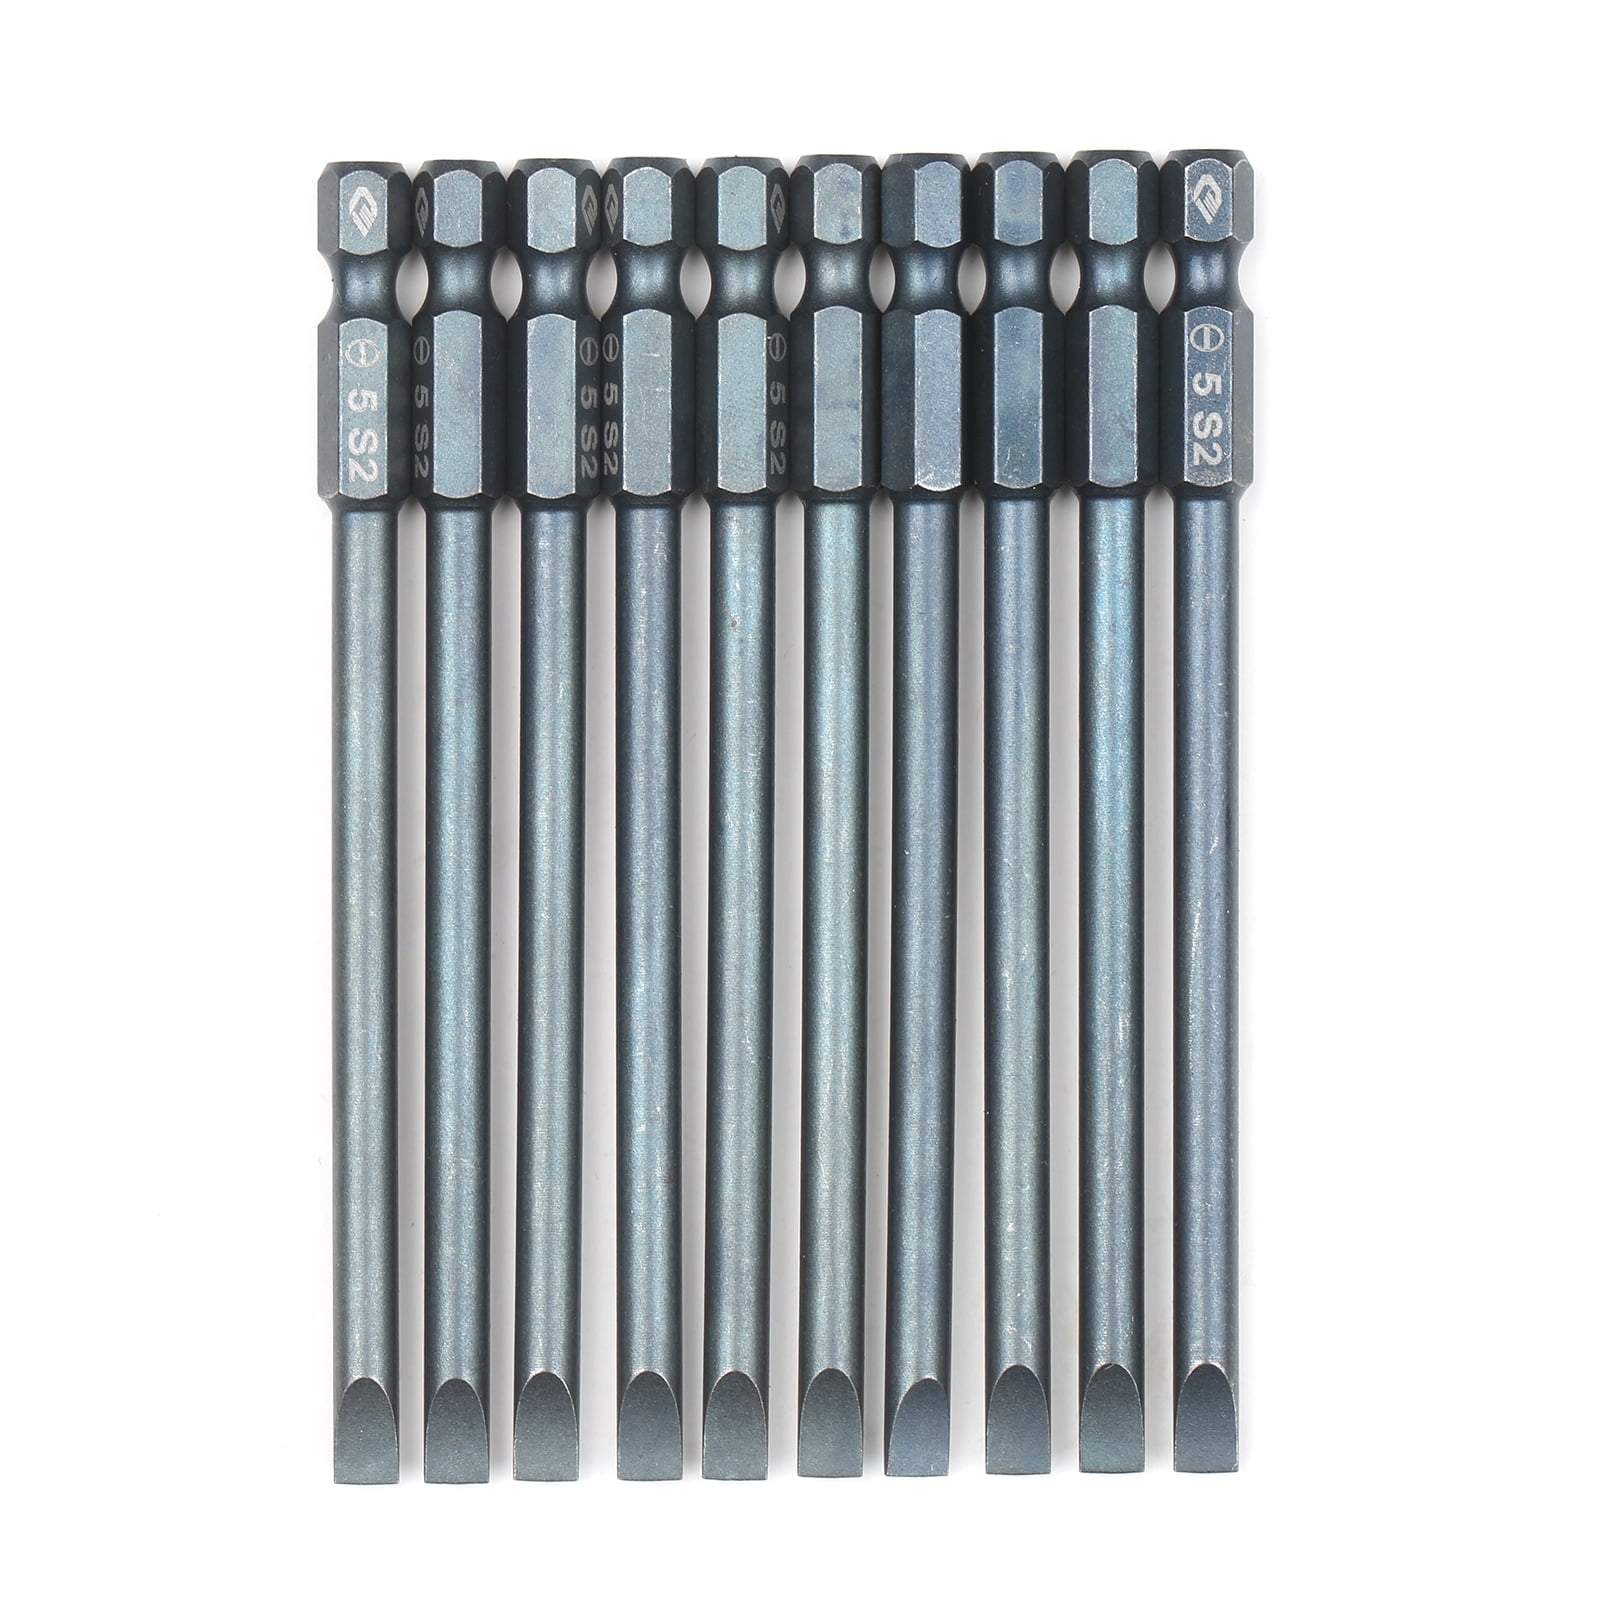 S2 Steel Power Screwdriver Bits Set Slotted Phillips Torx Slotted 1/4" Hex Shank 